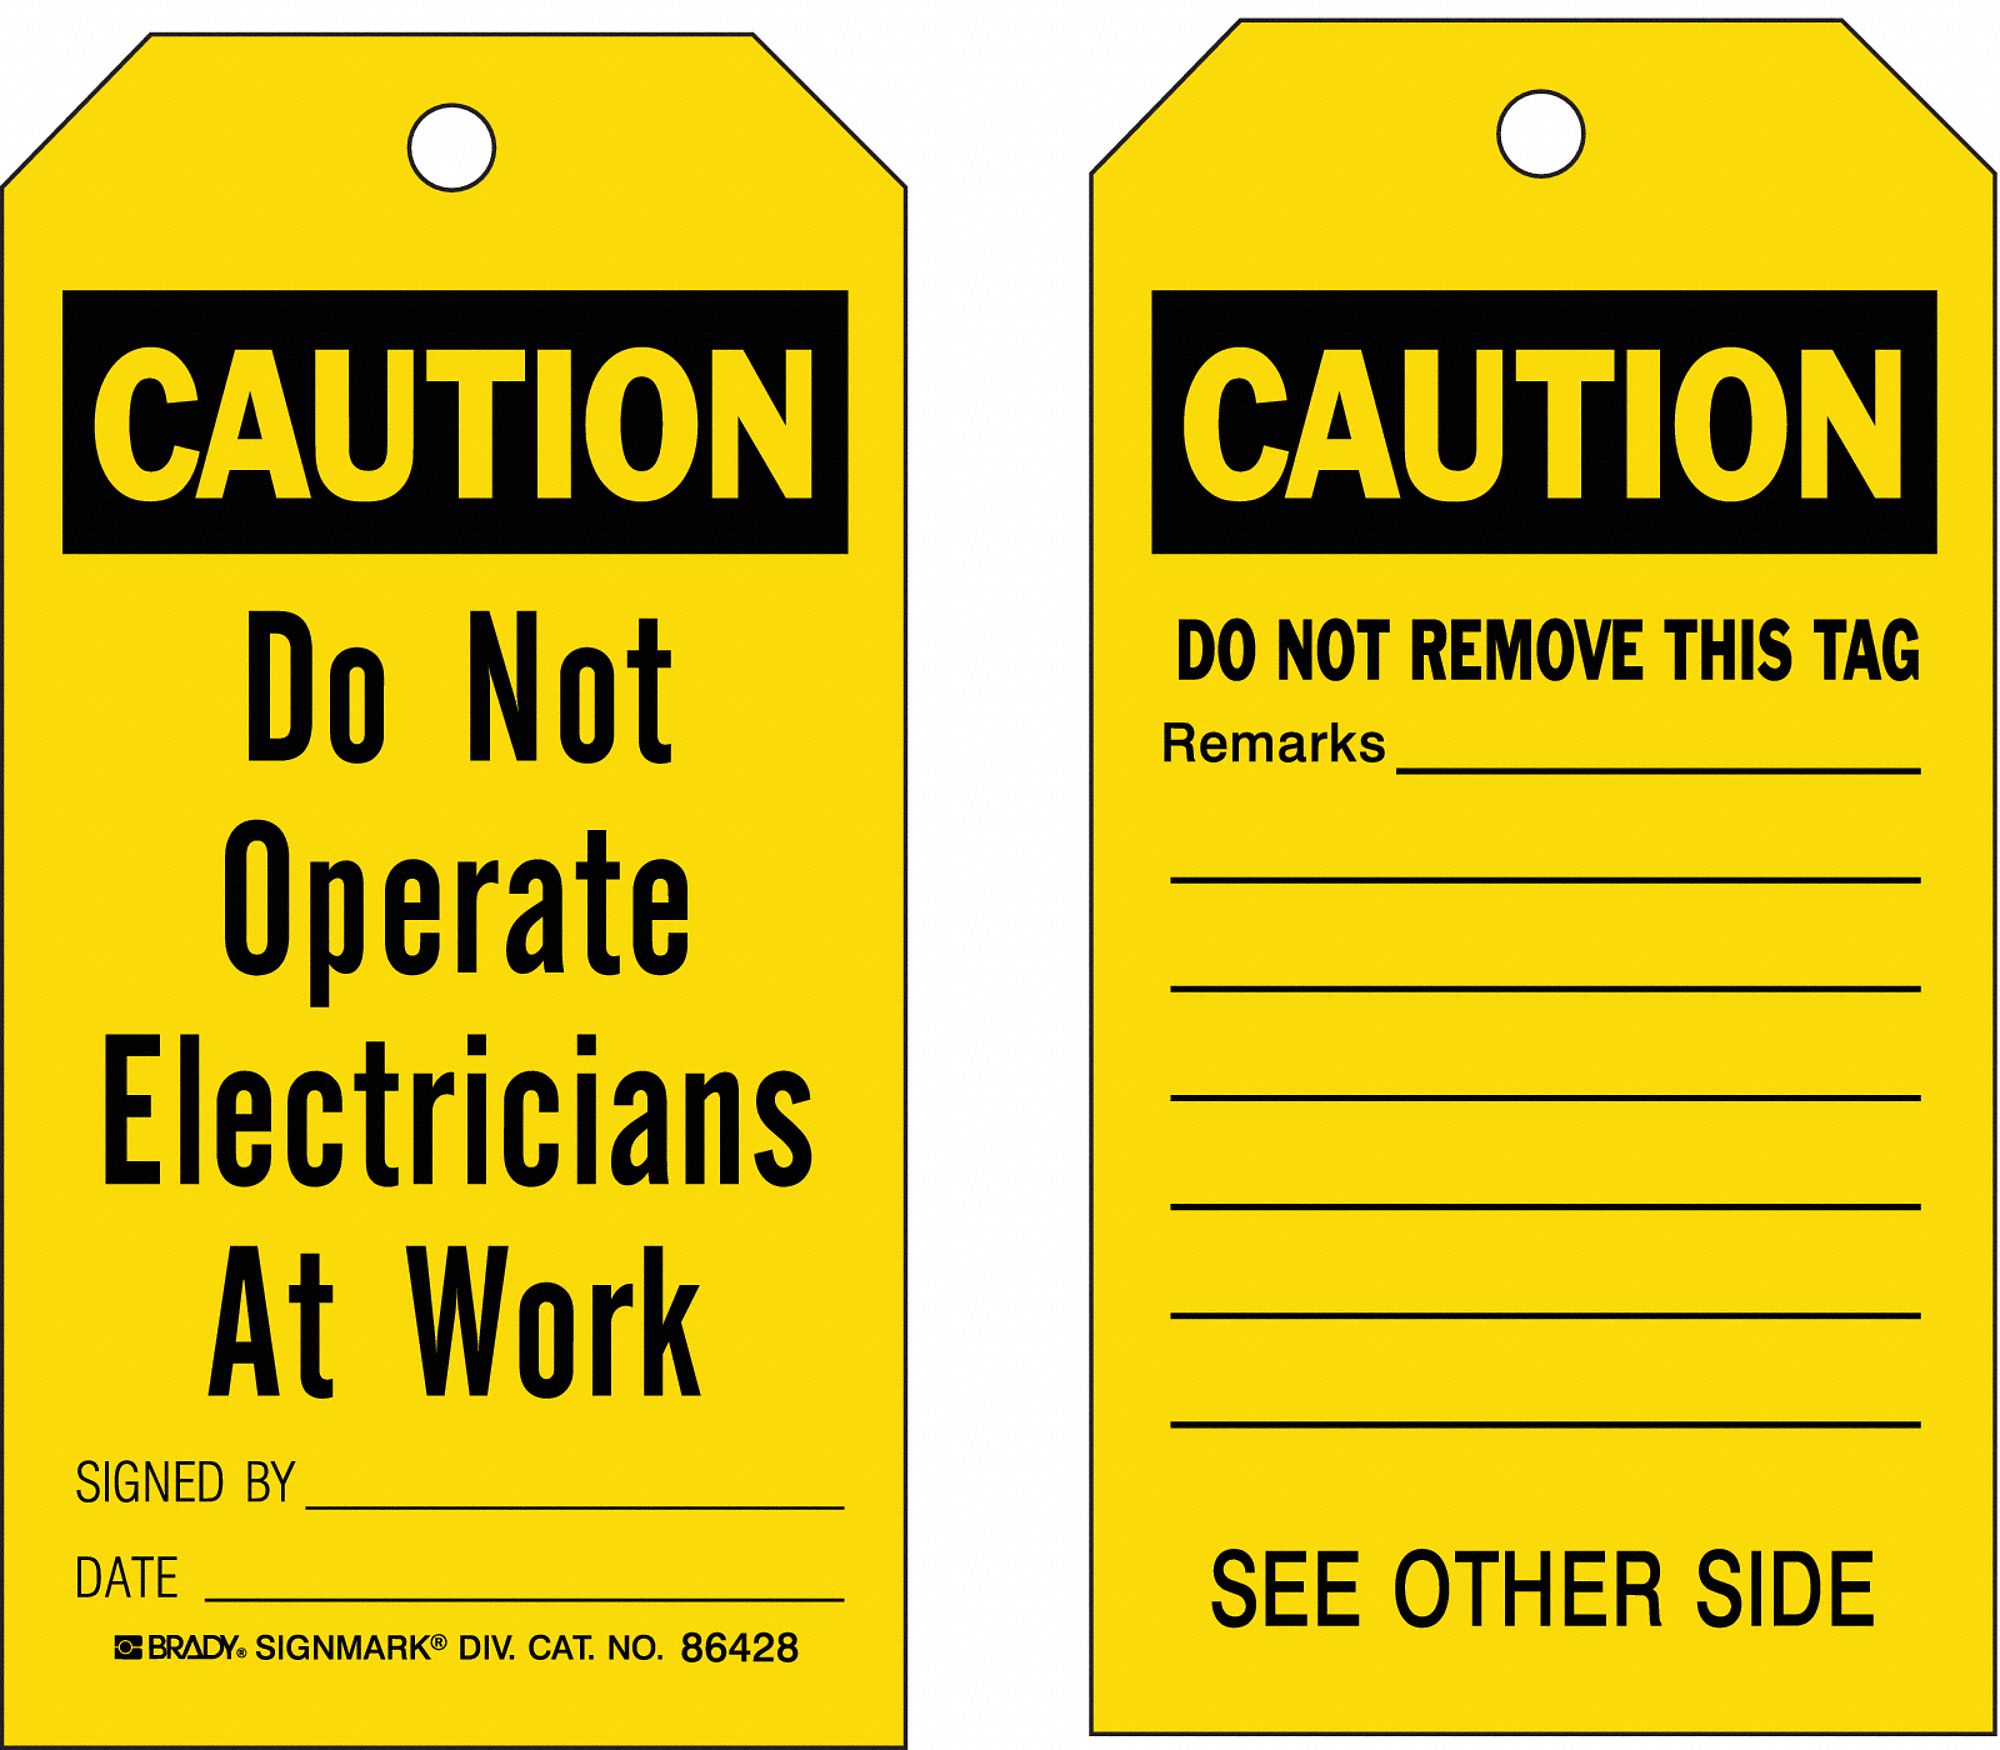 Heavy-Duty PolyesterDo Not Operate Electricians At Work, Caution Tag 5-3/4